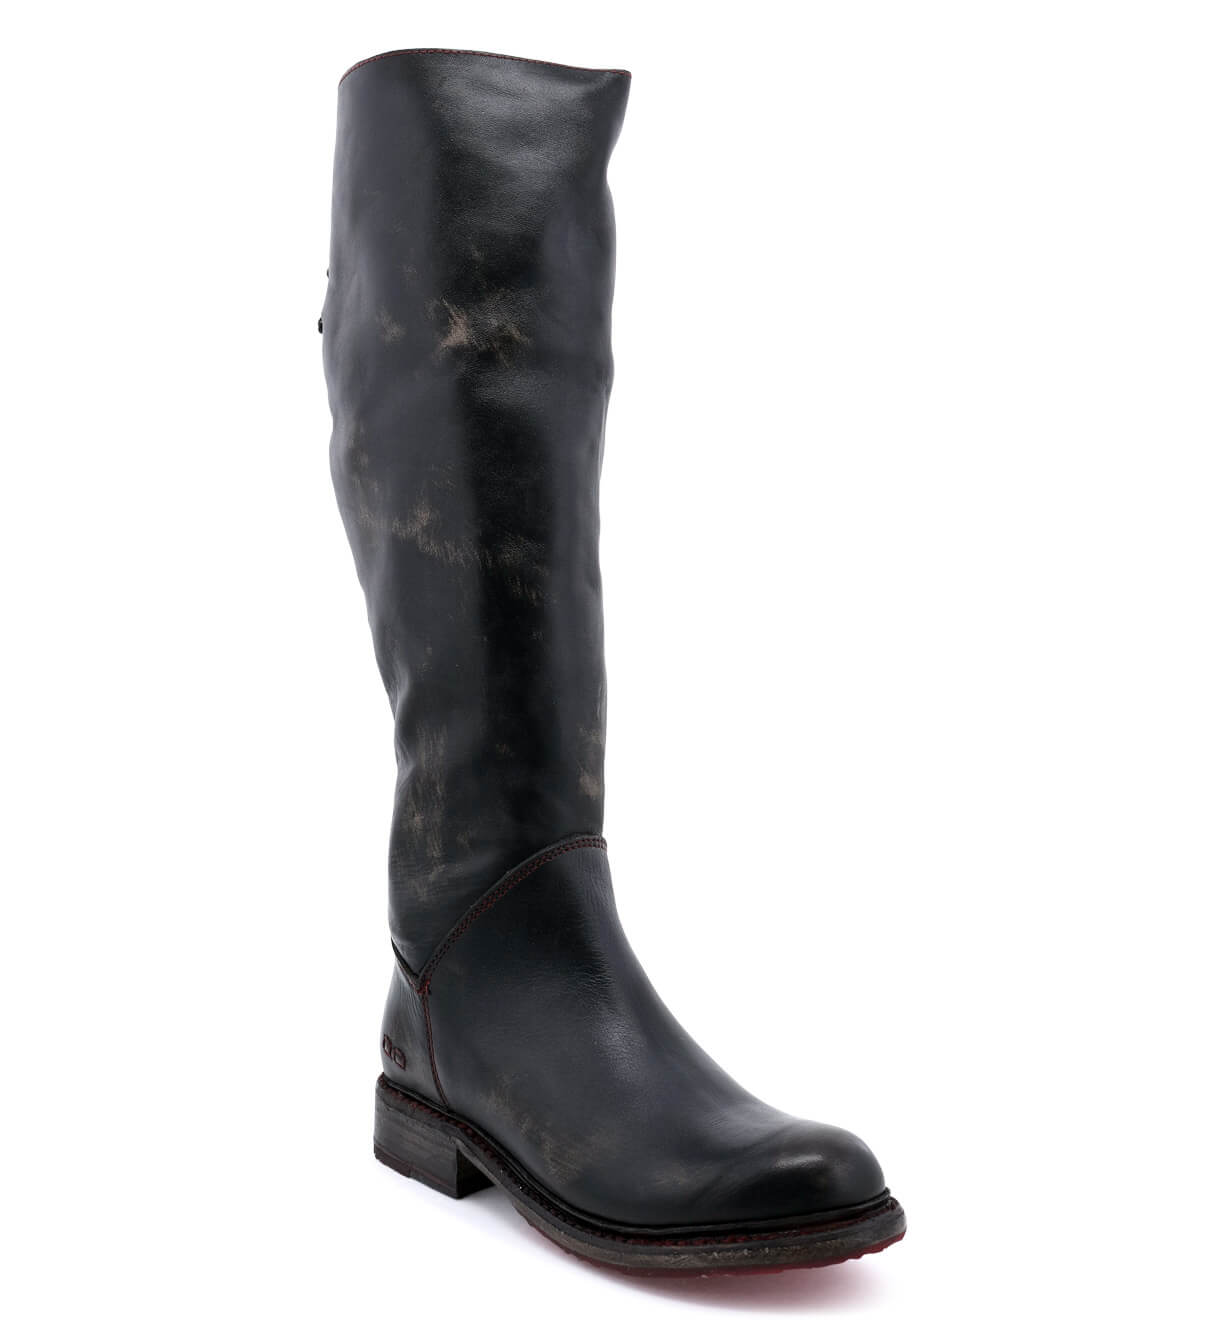 A women's black leather Manchester riding boot by Bed Stu.